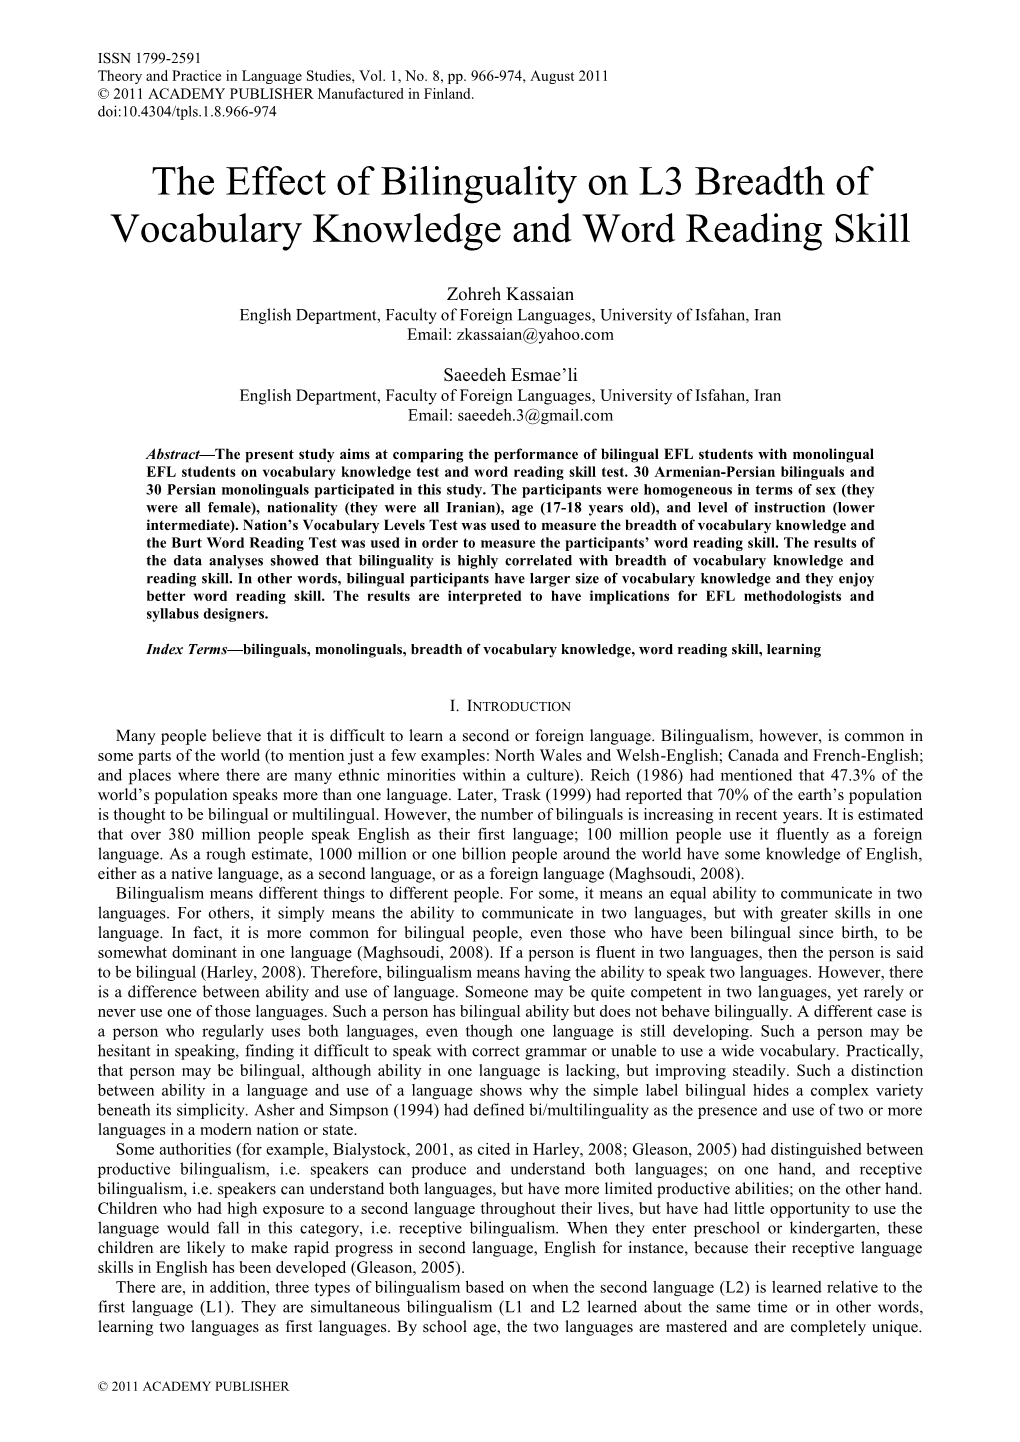 The Effect of Bilinguality on L3 Breadth of Vocabulary Knowledge and Word Reading Skill